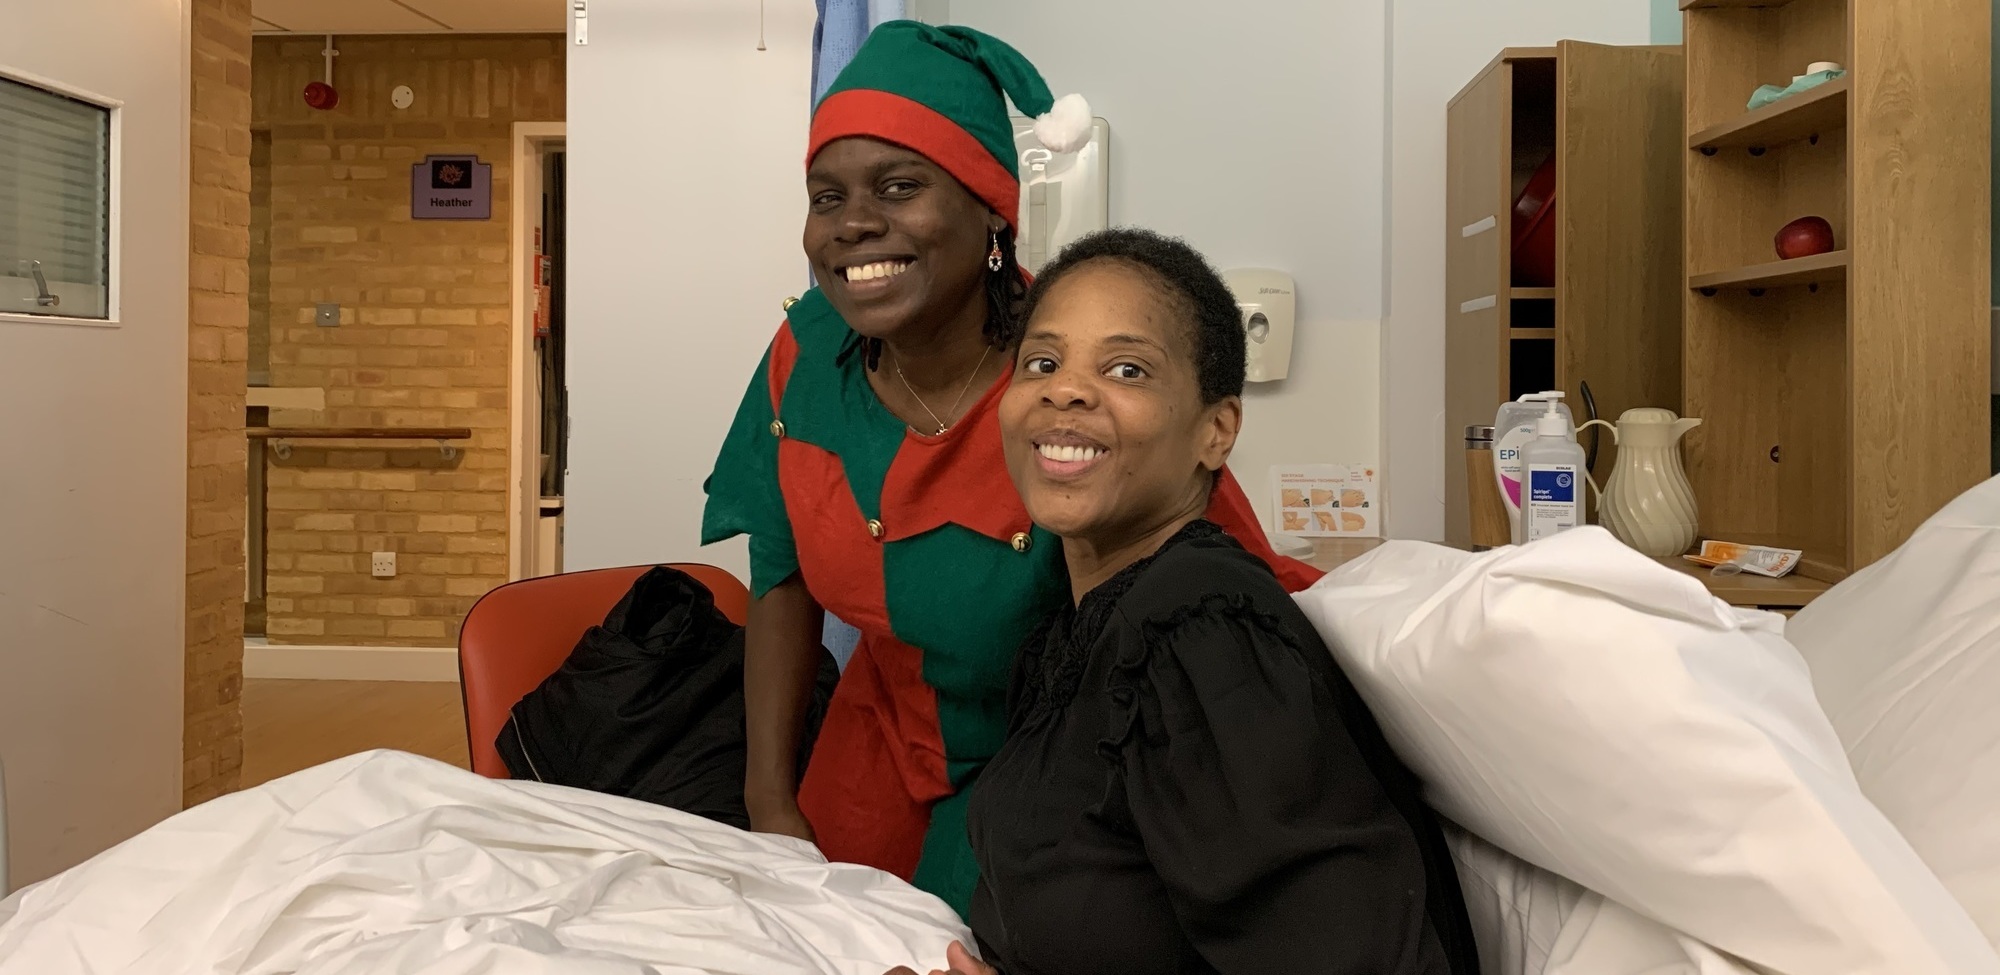 Wendy Lord and her friend Jacquie Charles who dressed as an elf (cropped)